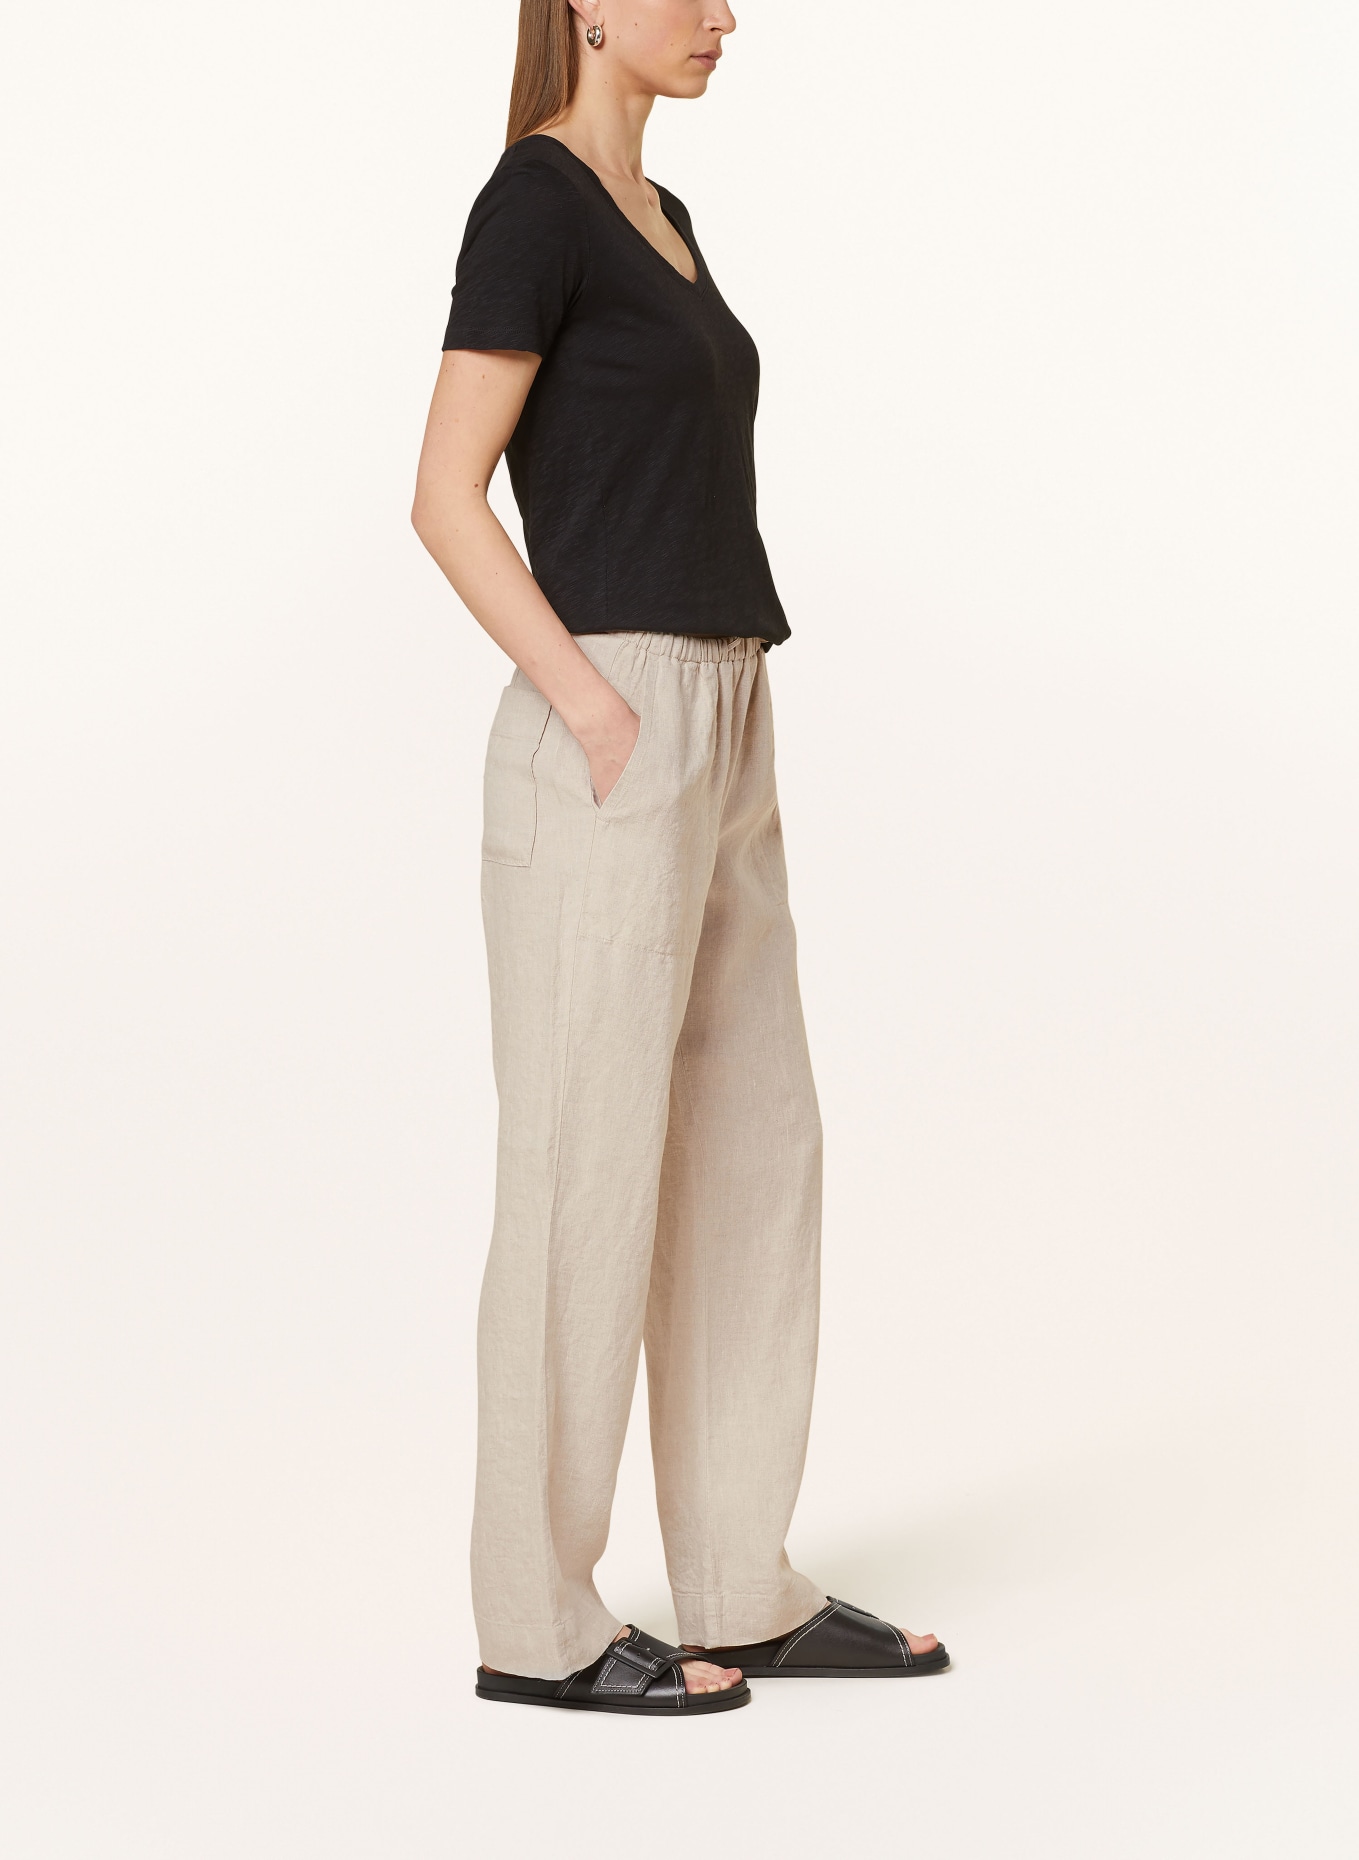 Marc O'Polo Linen pants in jogger style, Color: BEIGE (Image 4)